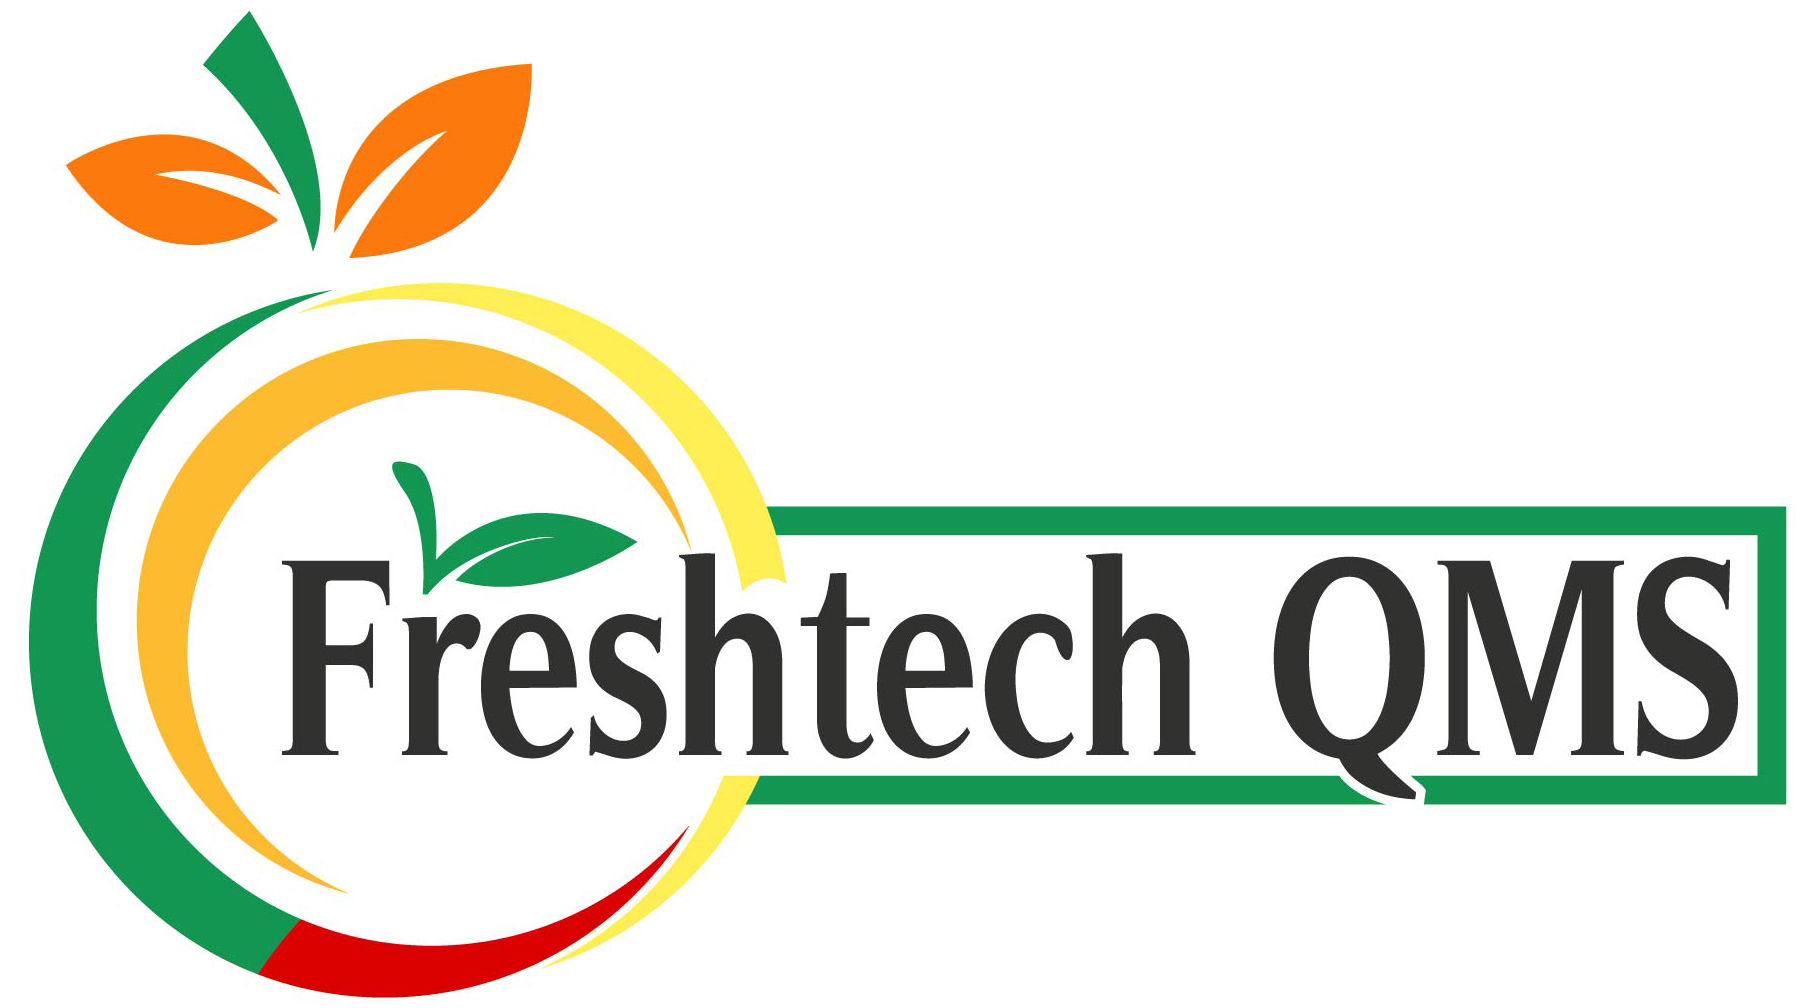  Freshtech QMS Produce Quality Inspection, Cargo Surveys, Food Safety Audit Solutions and Technical Services